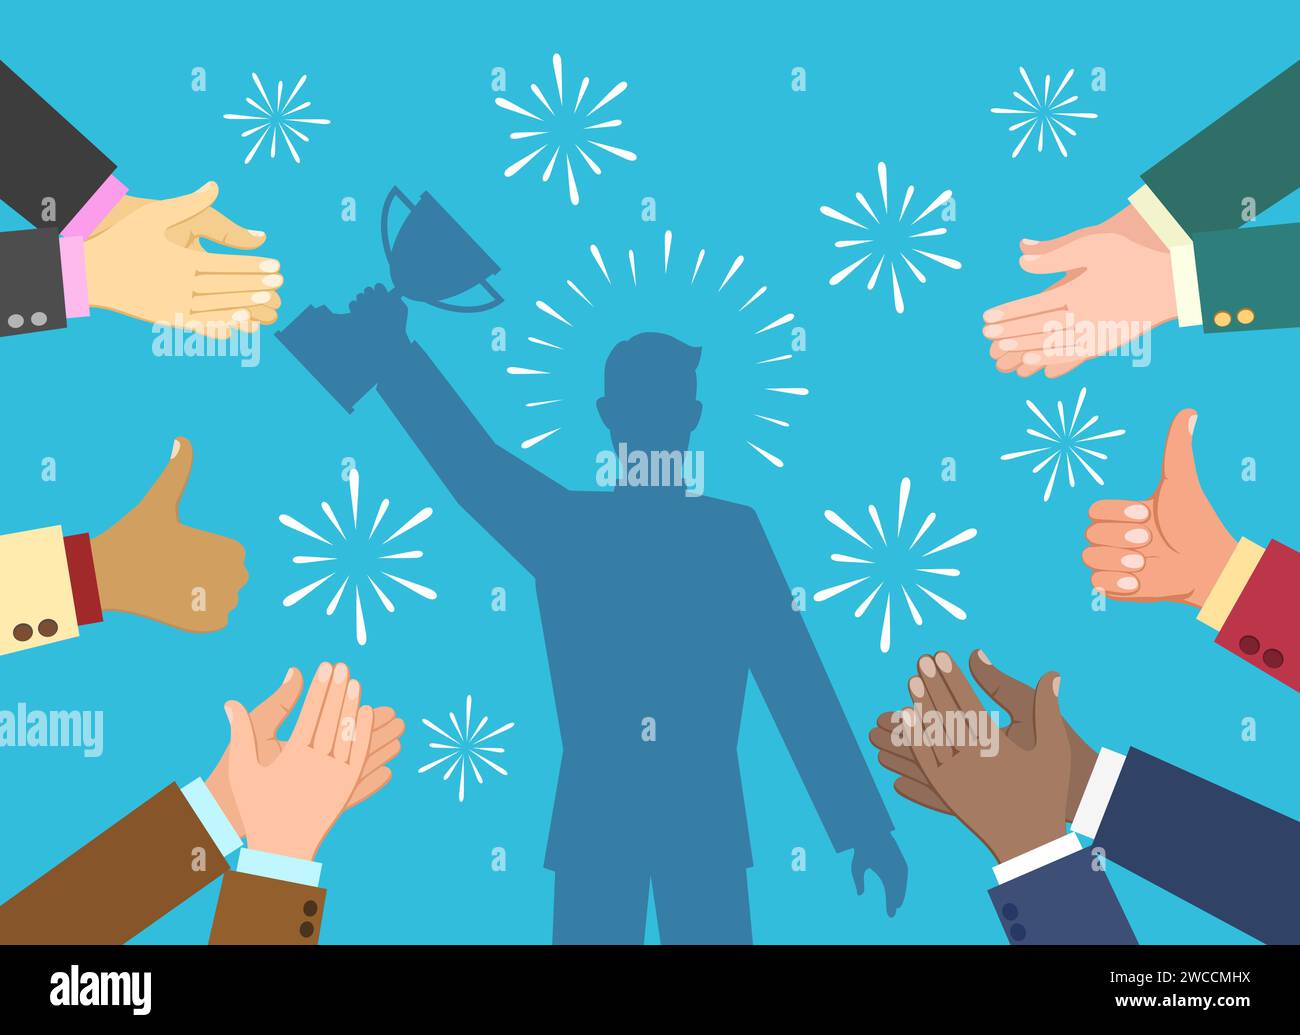 Hand claps celebrate applause Stock Vector